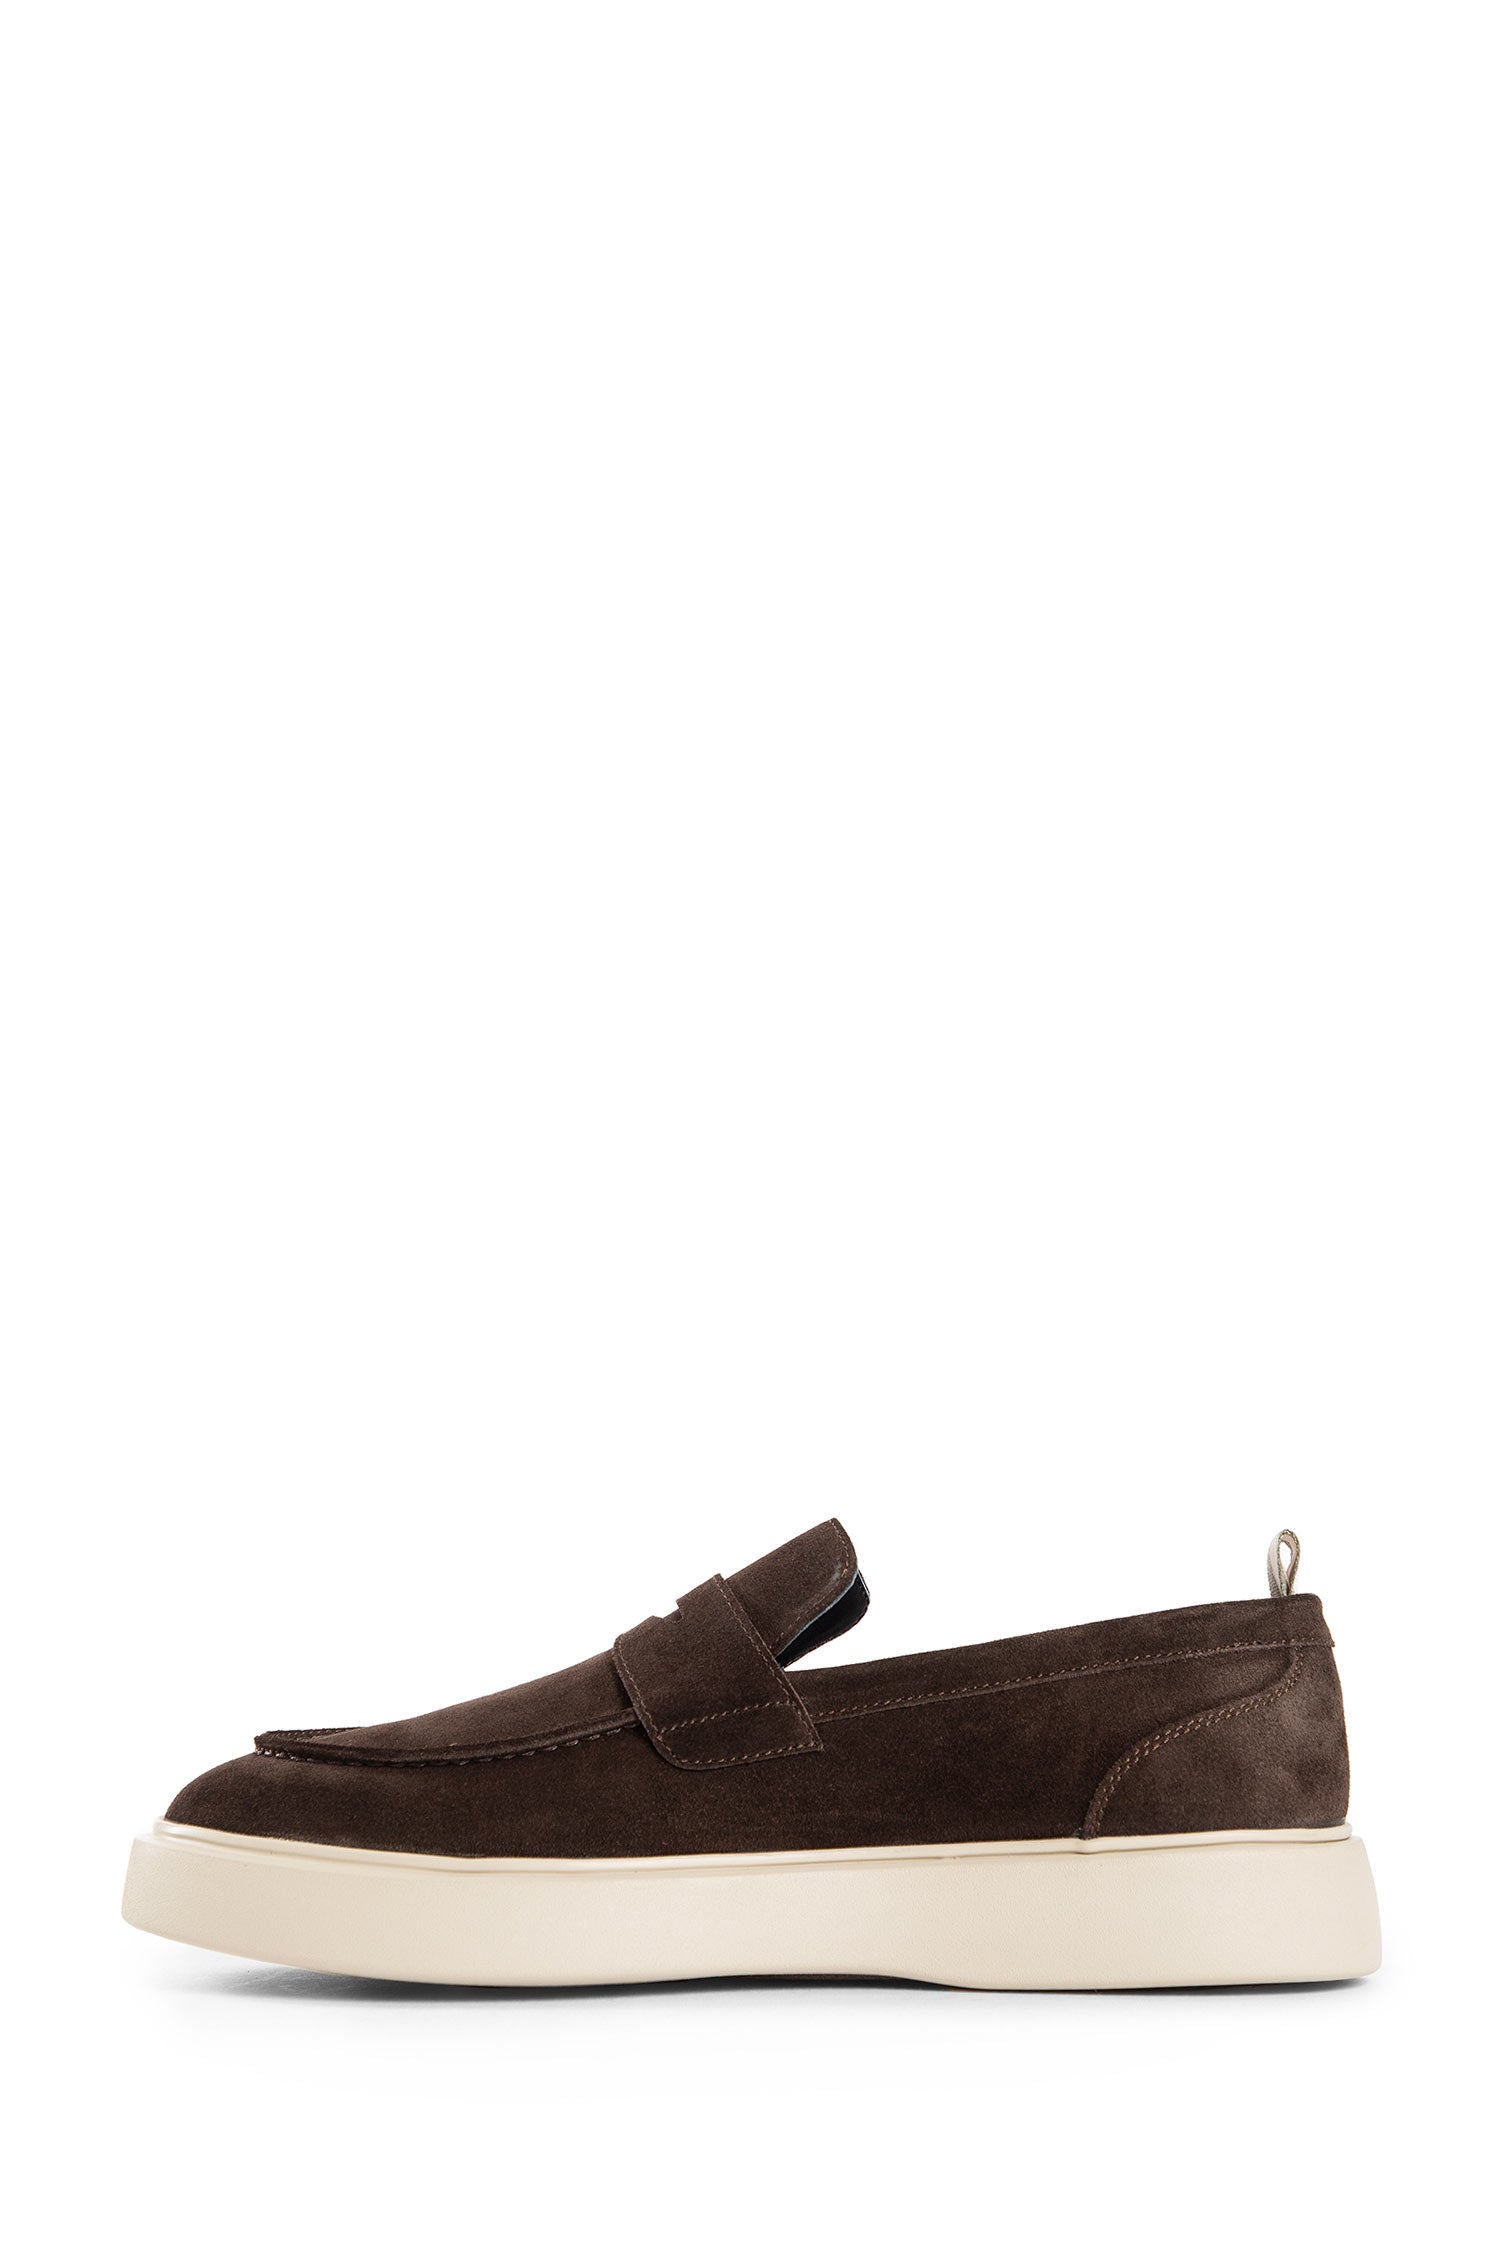 OFFICINE CREATIVE MAN BROWN LOAFERS